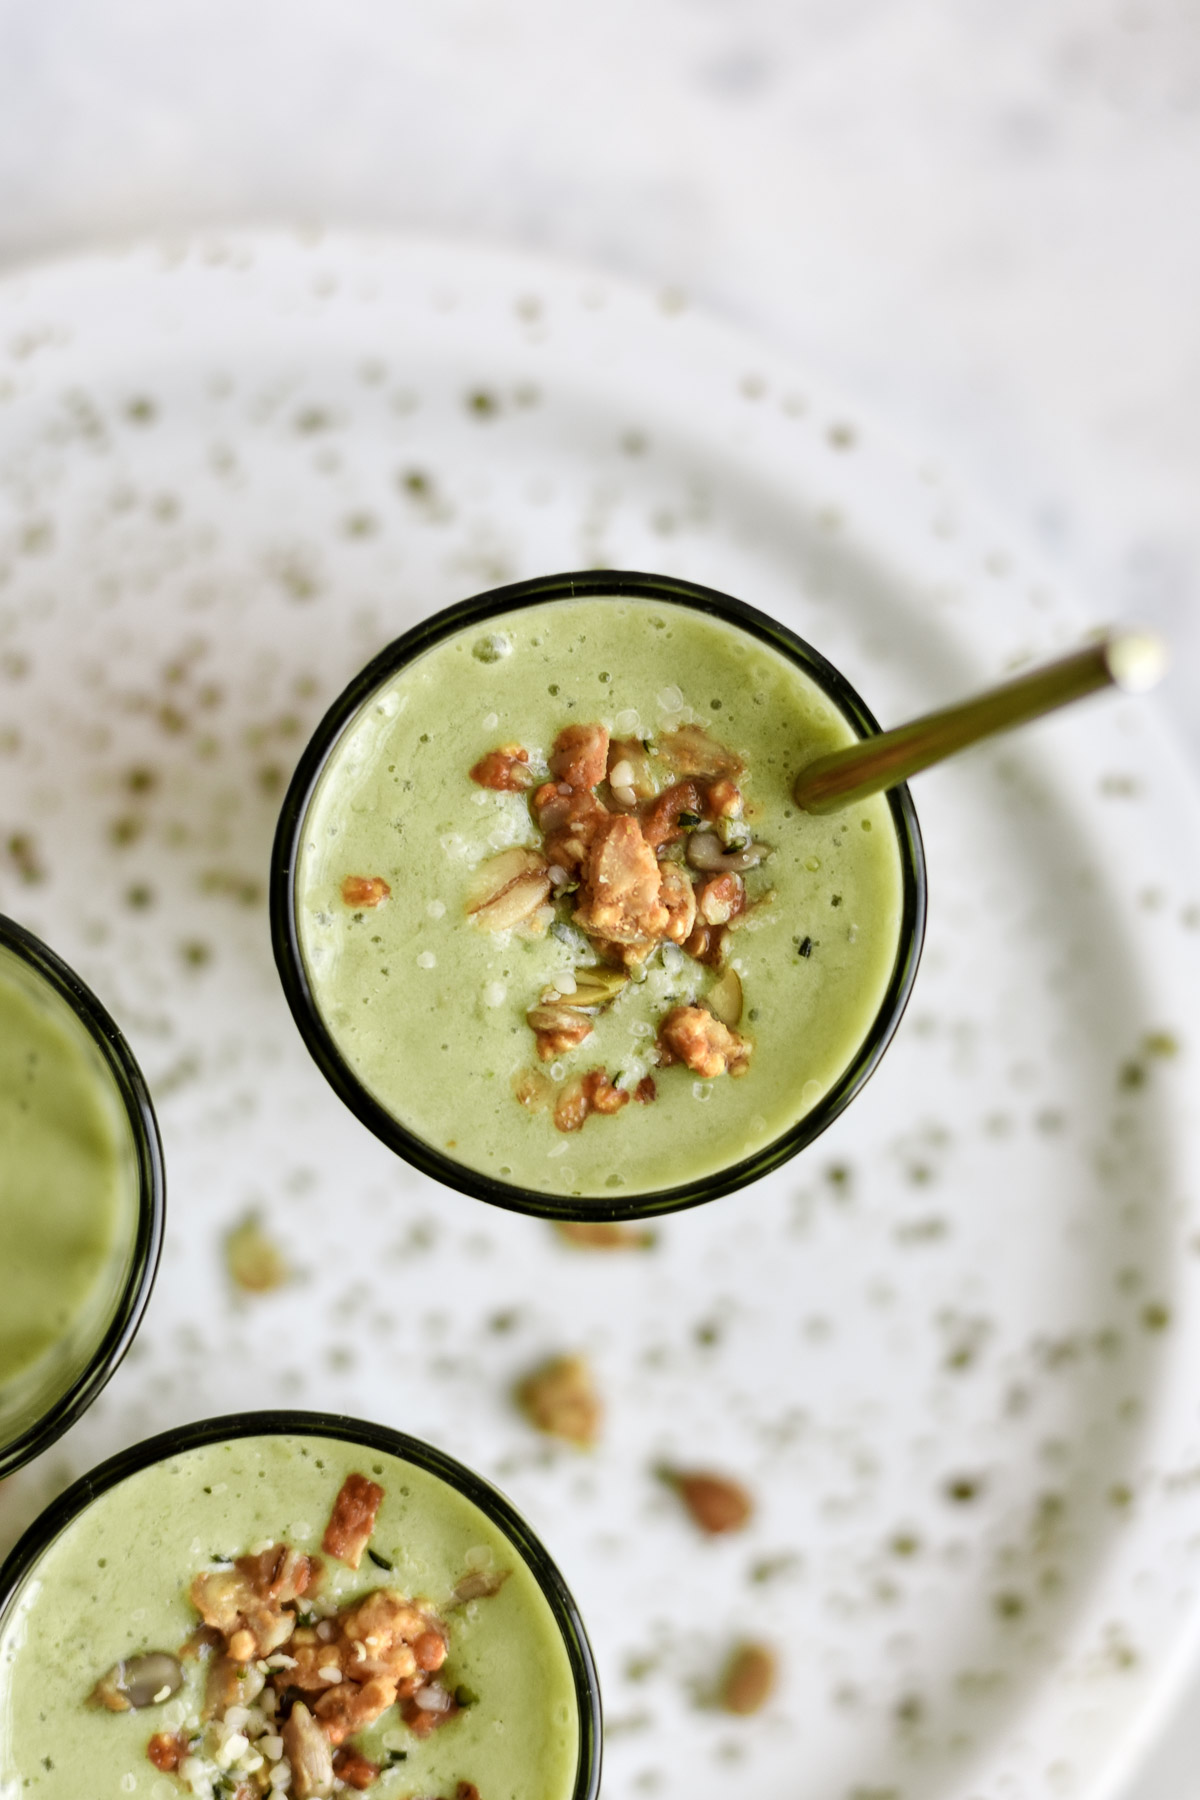 a green smoothie topped with granola